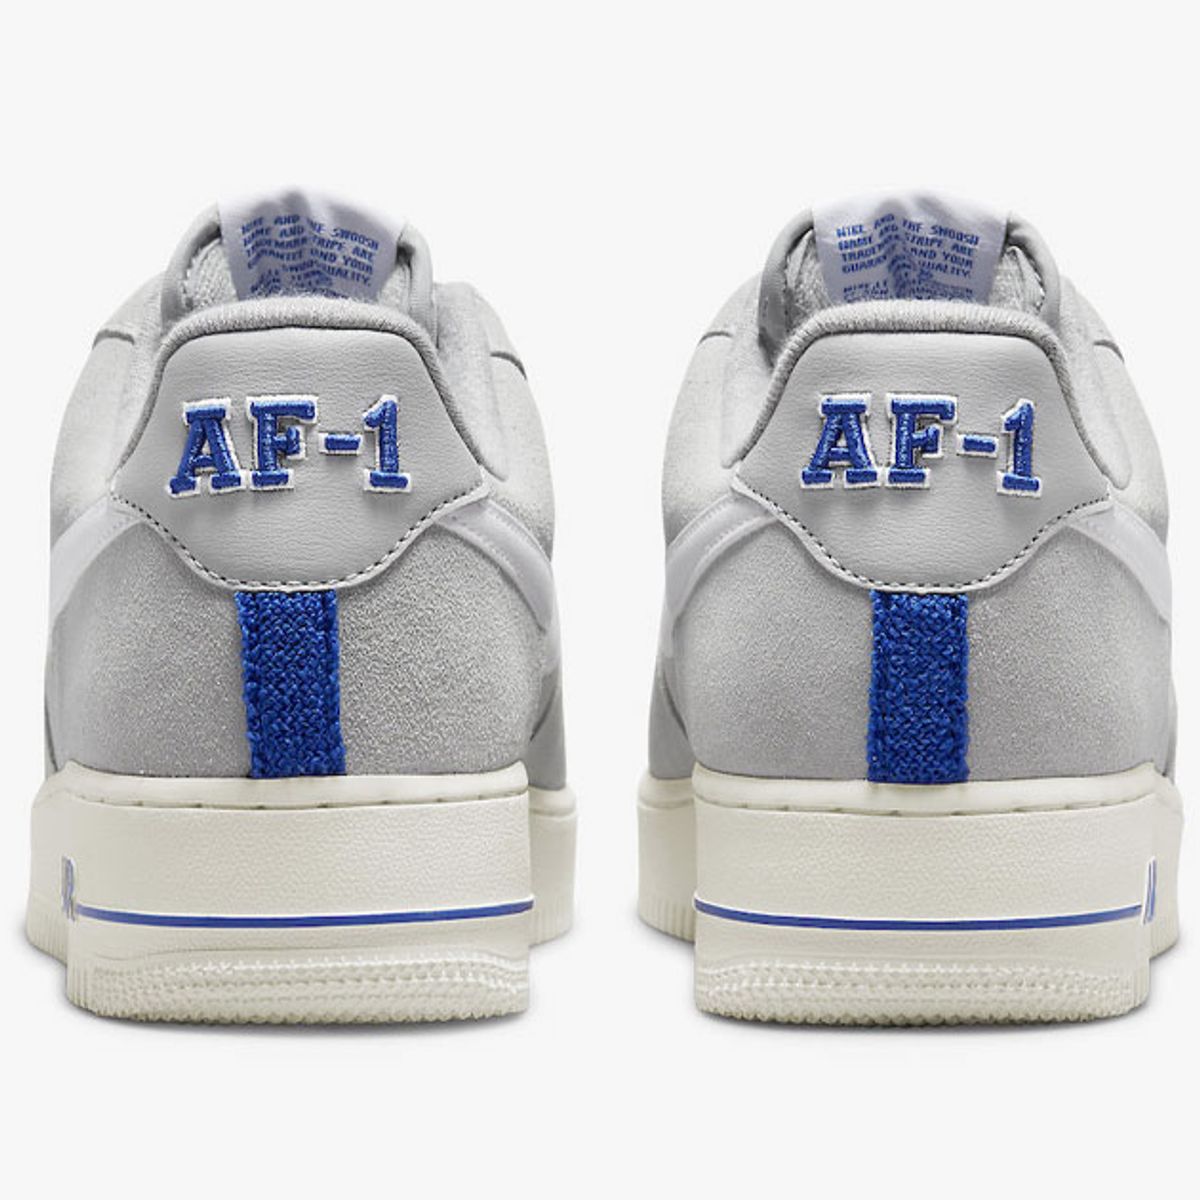 The Nike Air Force 1 'Athletic Club' is Tracksuit-Friendly - Freaker